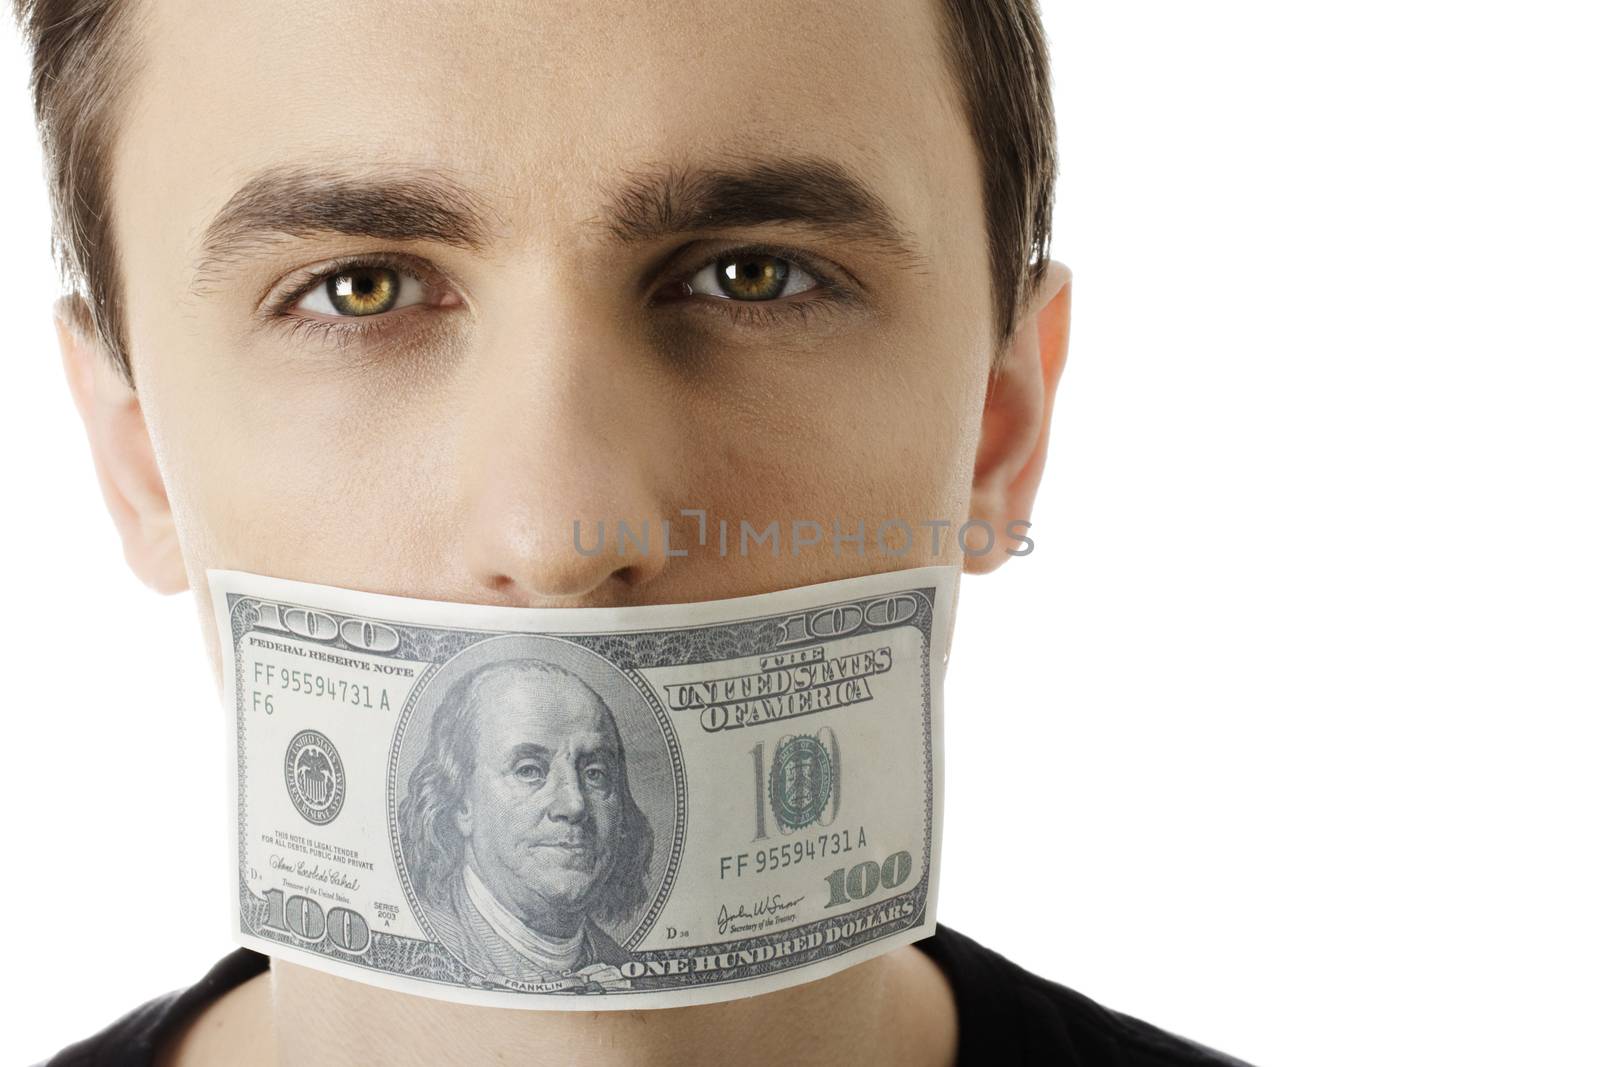 A man with a 100 dollar bill on his mouth. Everyone has a price.